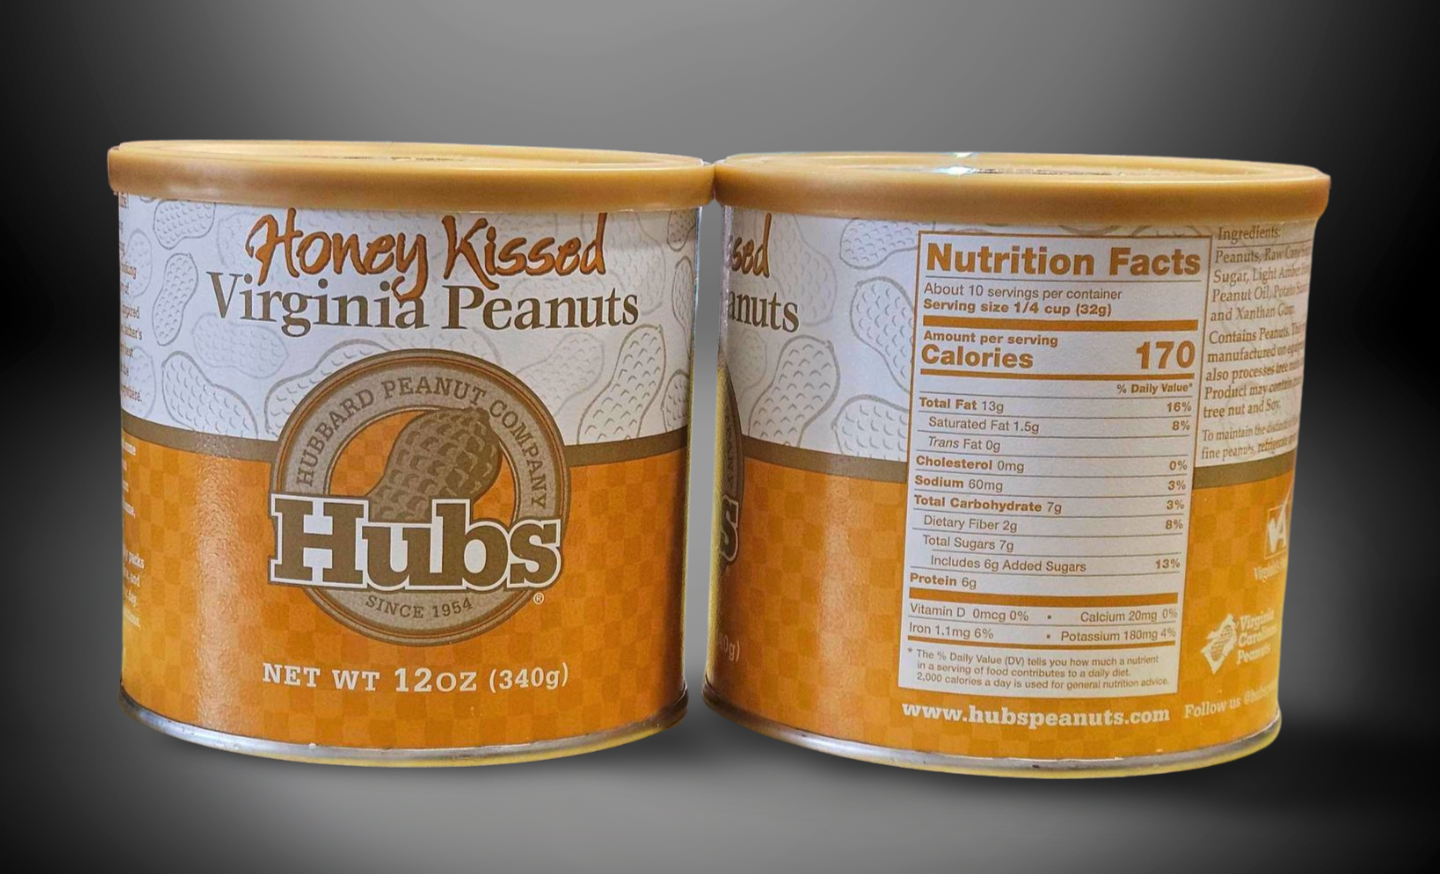 Hubs Honey Kissed Virginia Peanuts 12 OZ - Dusty's Country Store